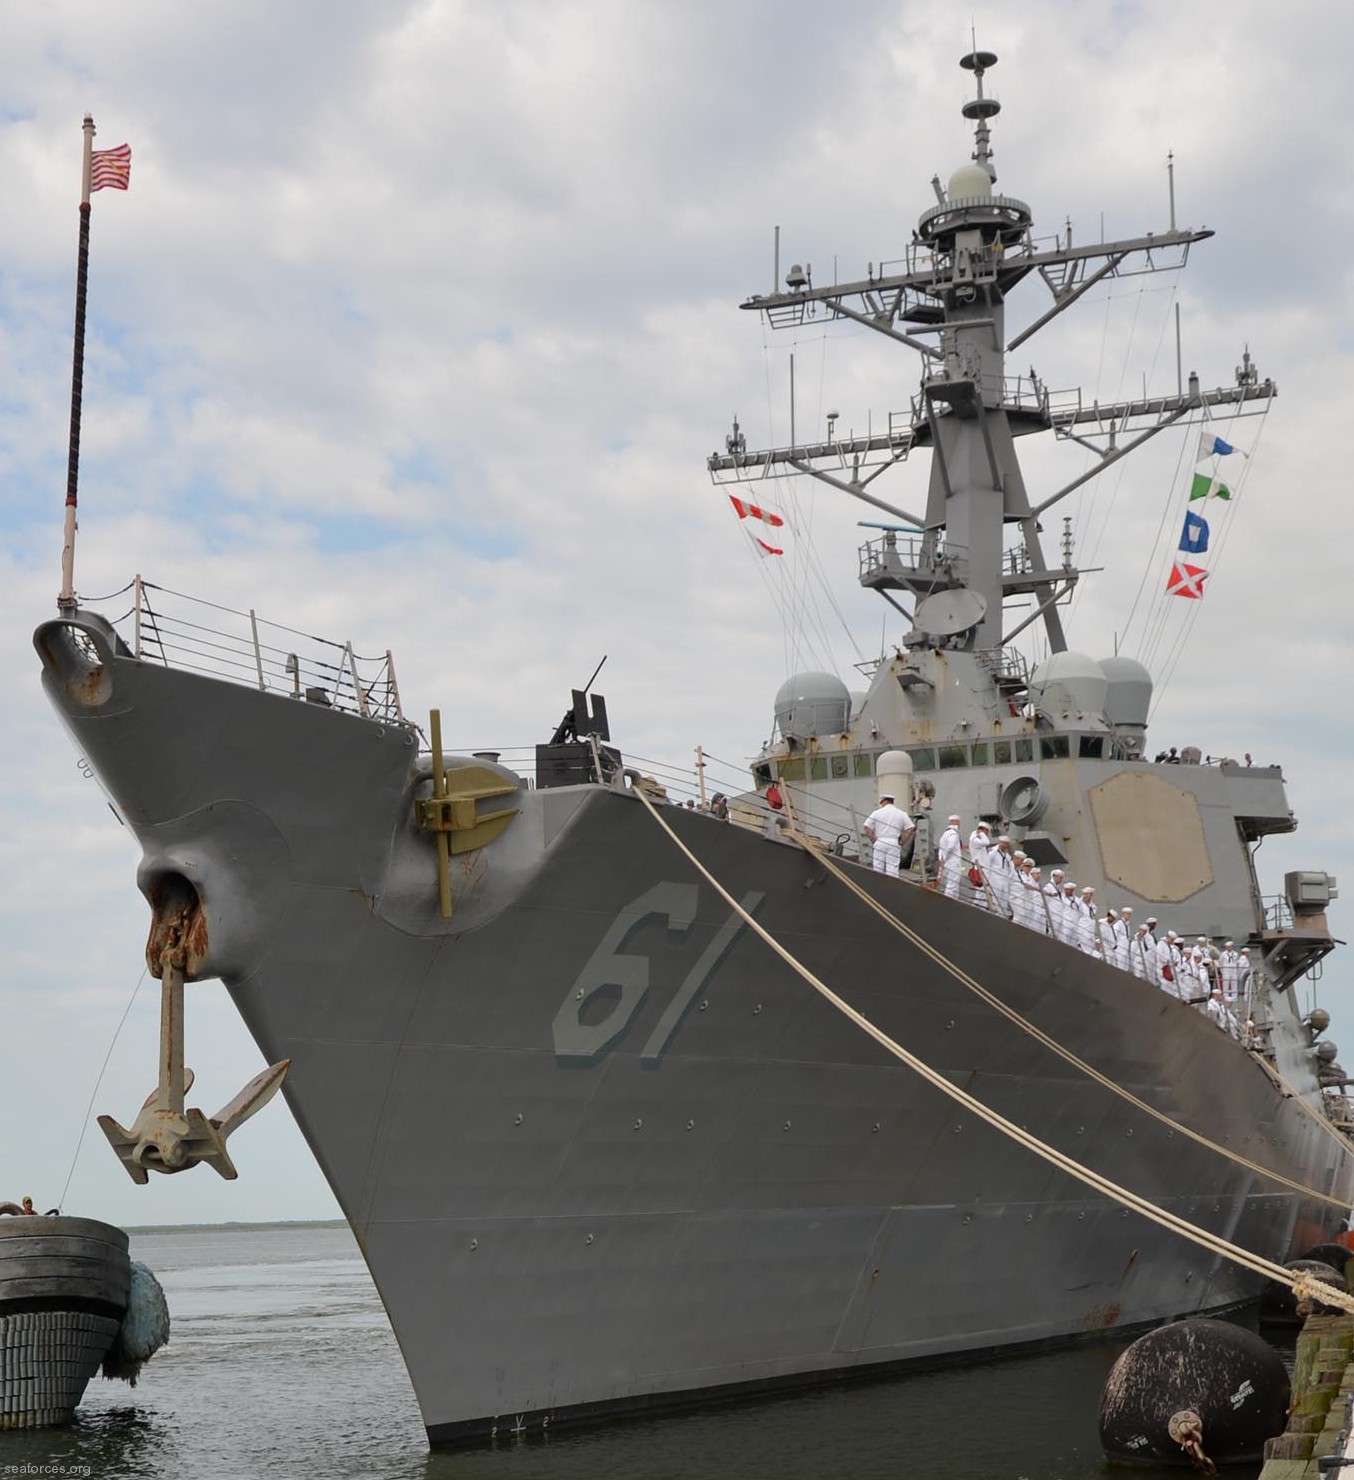 ddg-61 uss ramage guided missile destroyer us navy 38